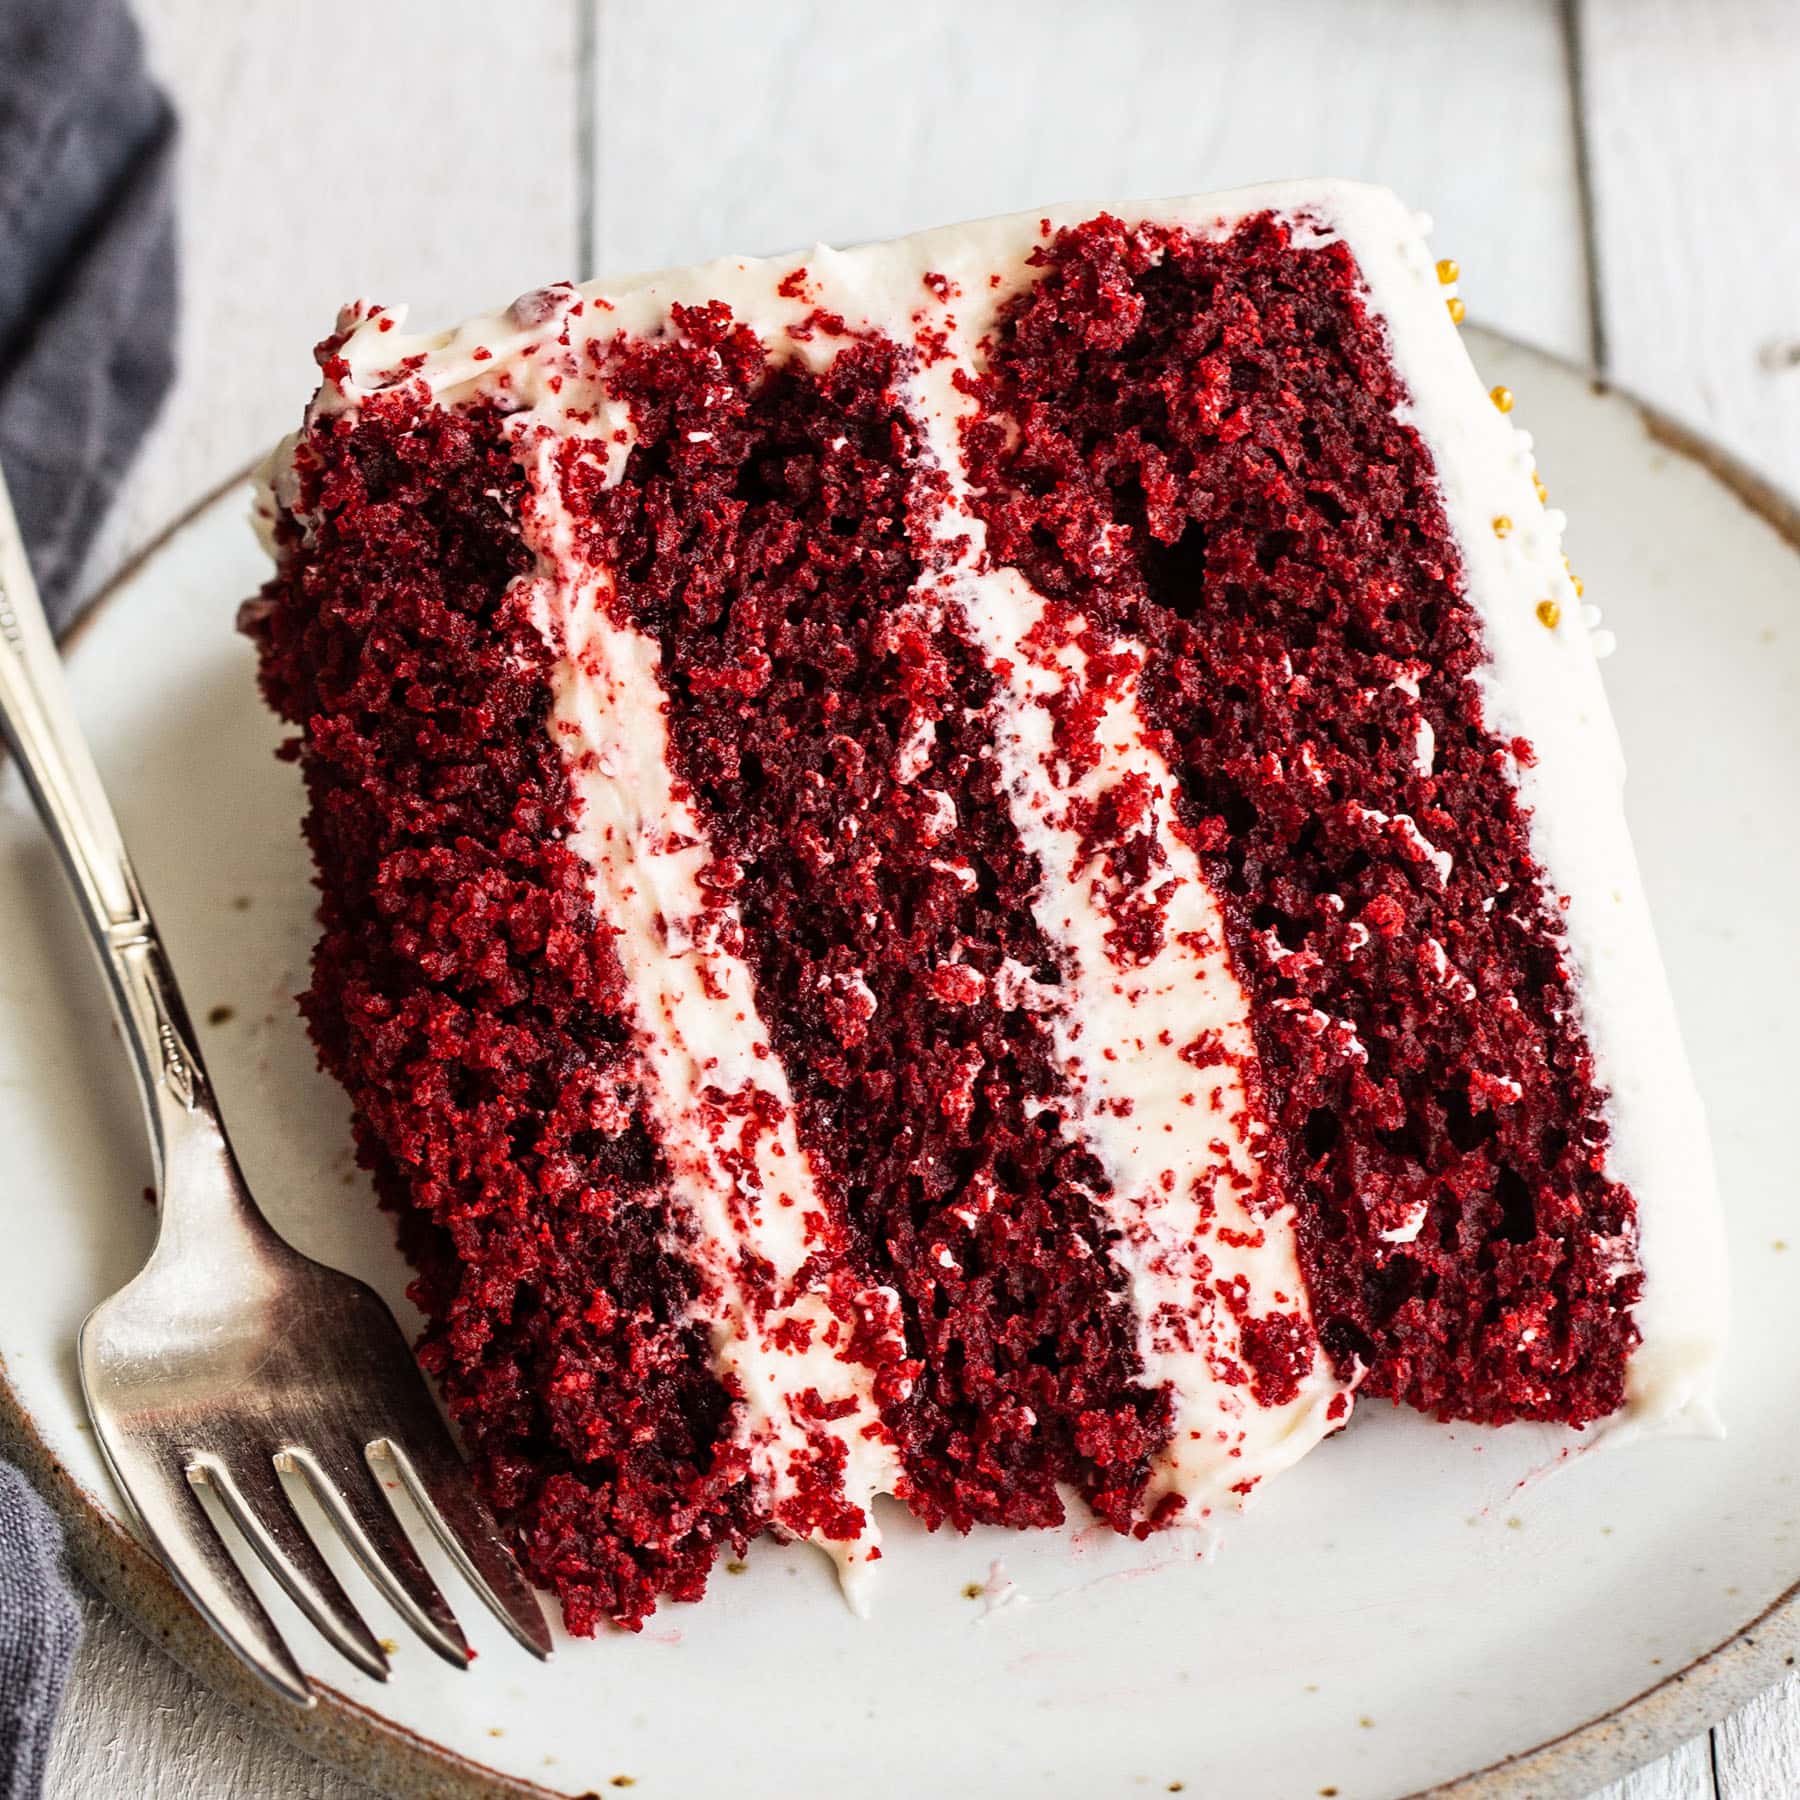 slice of the best red velvet cake recipe made with buttermilk and cocoa powder